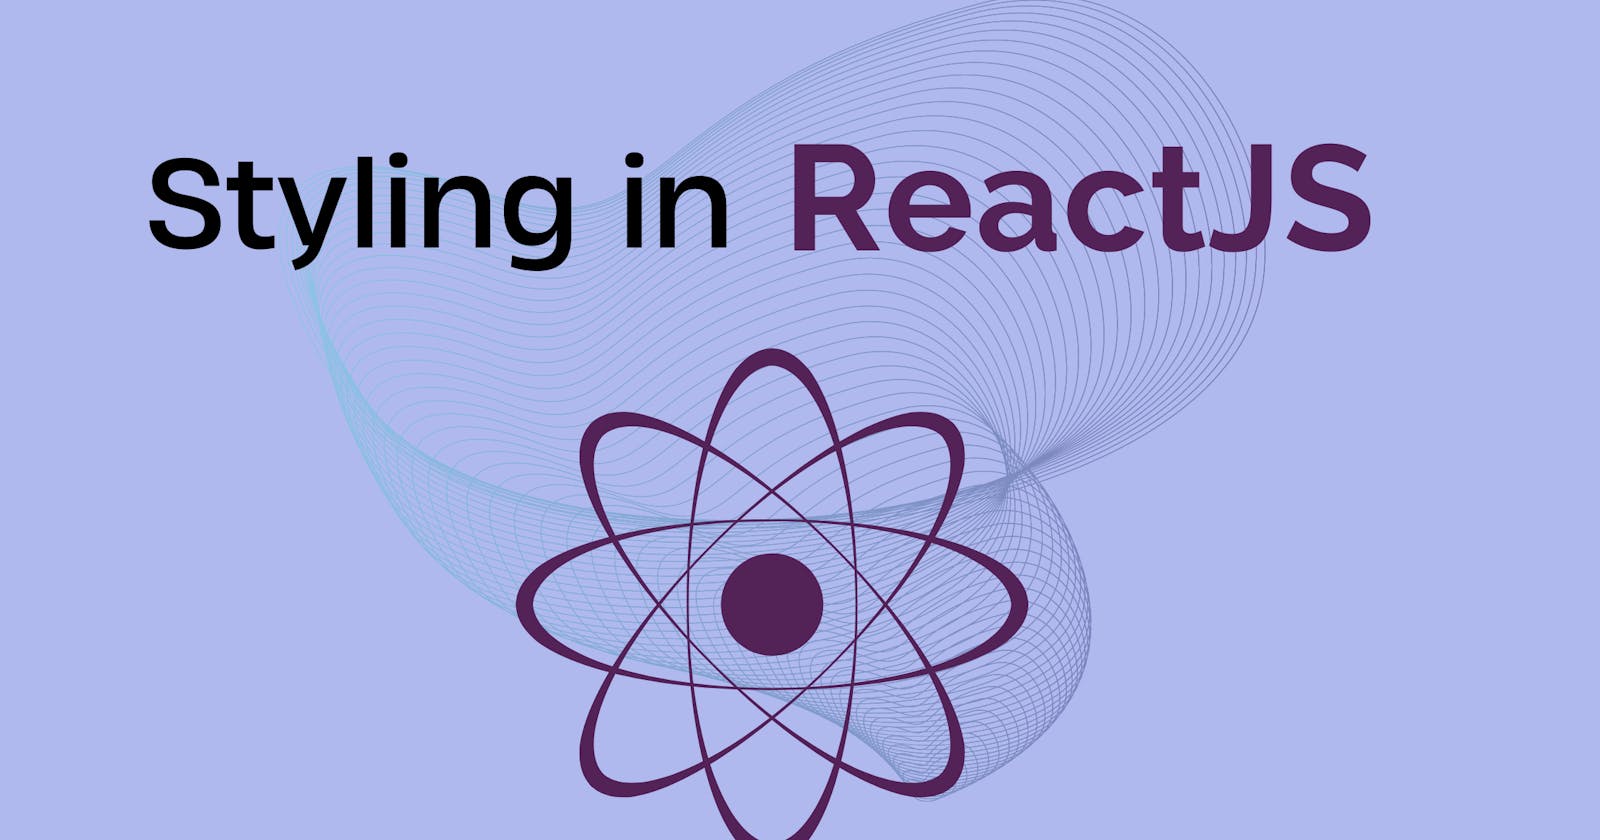 CSS styling in ReactJS